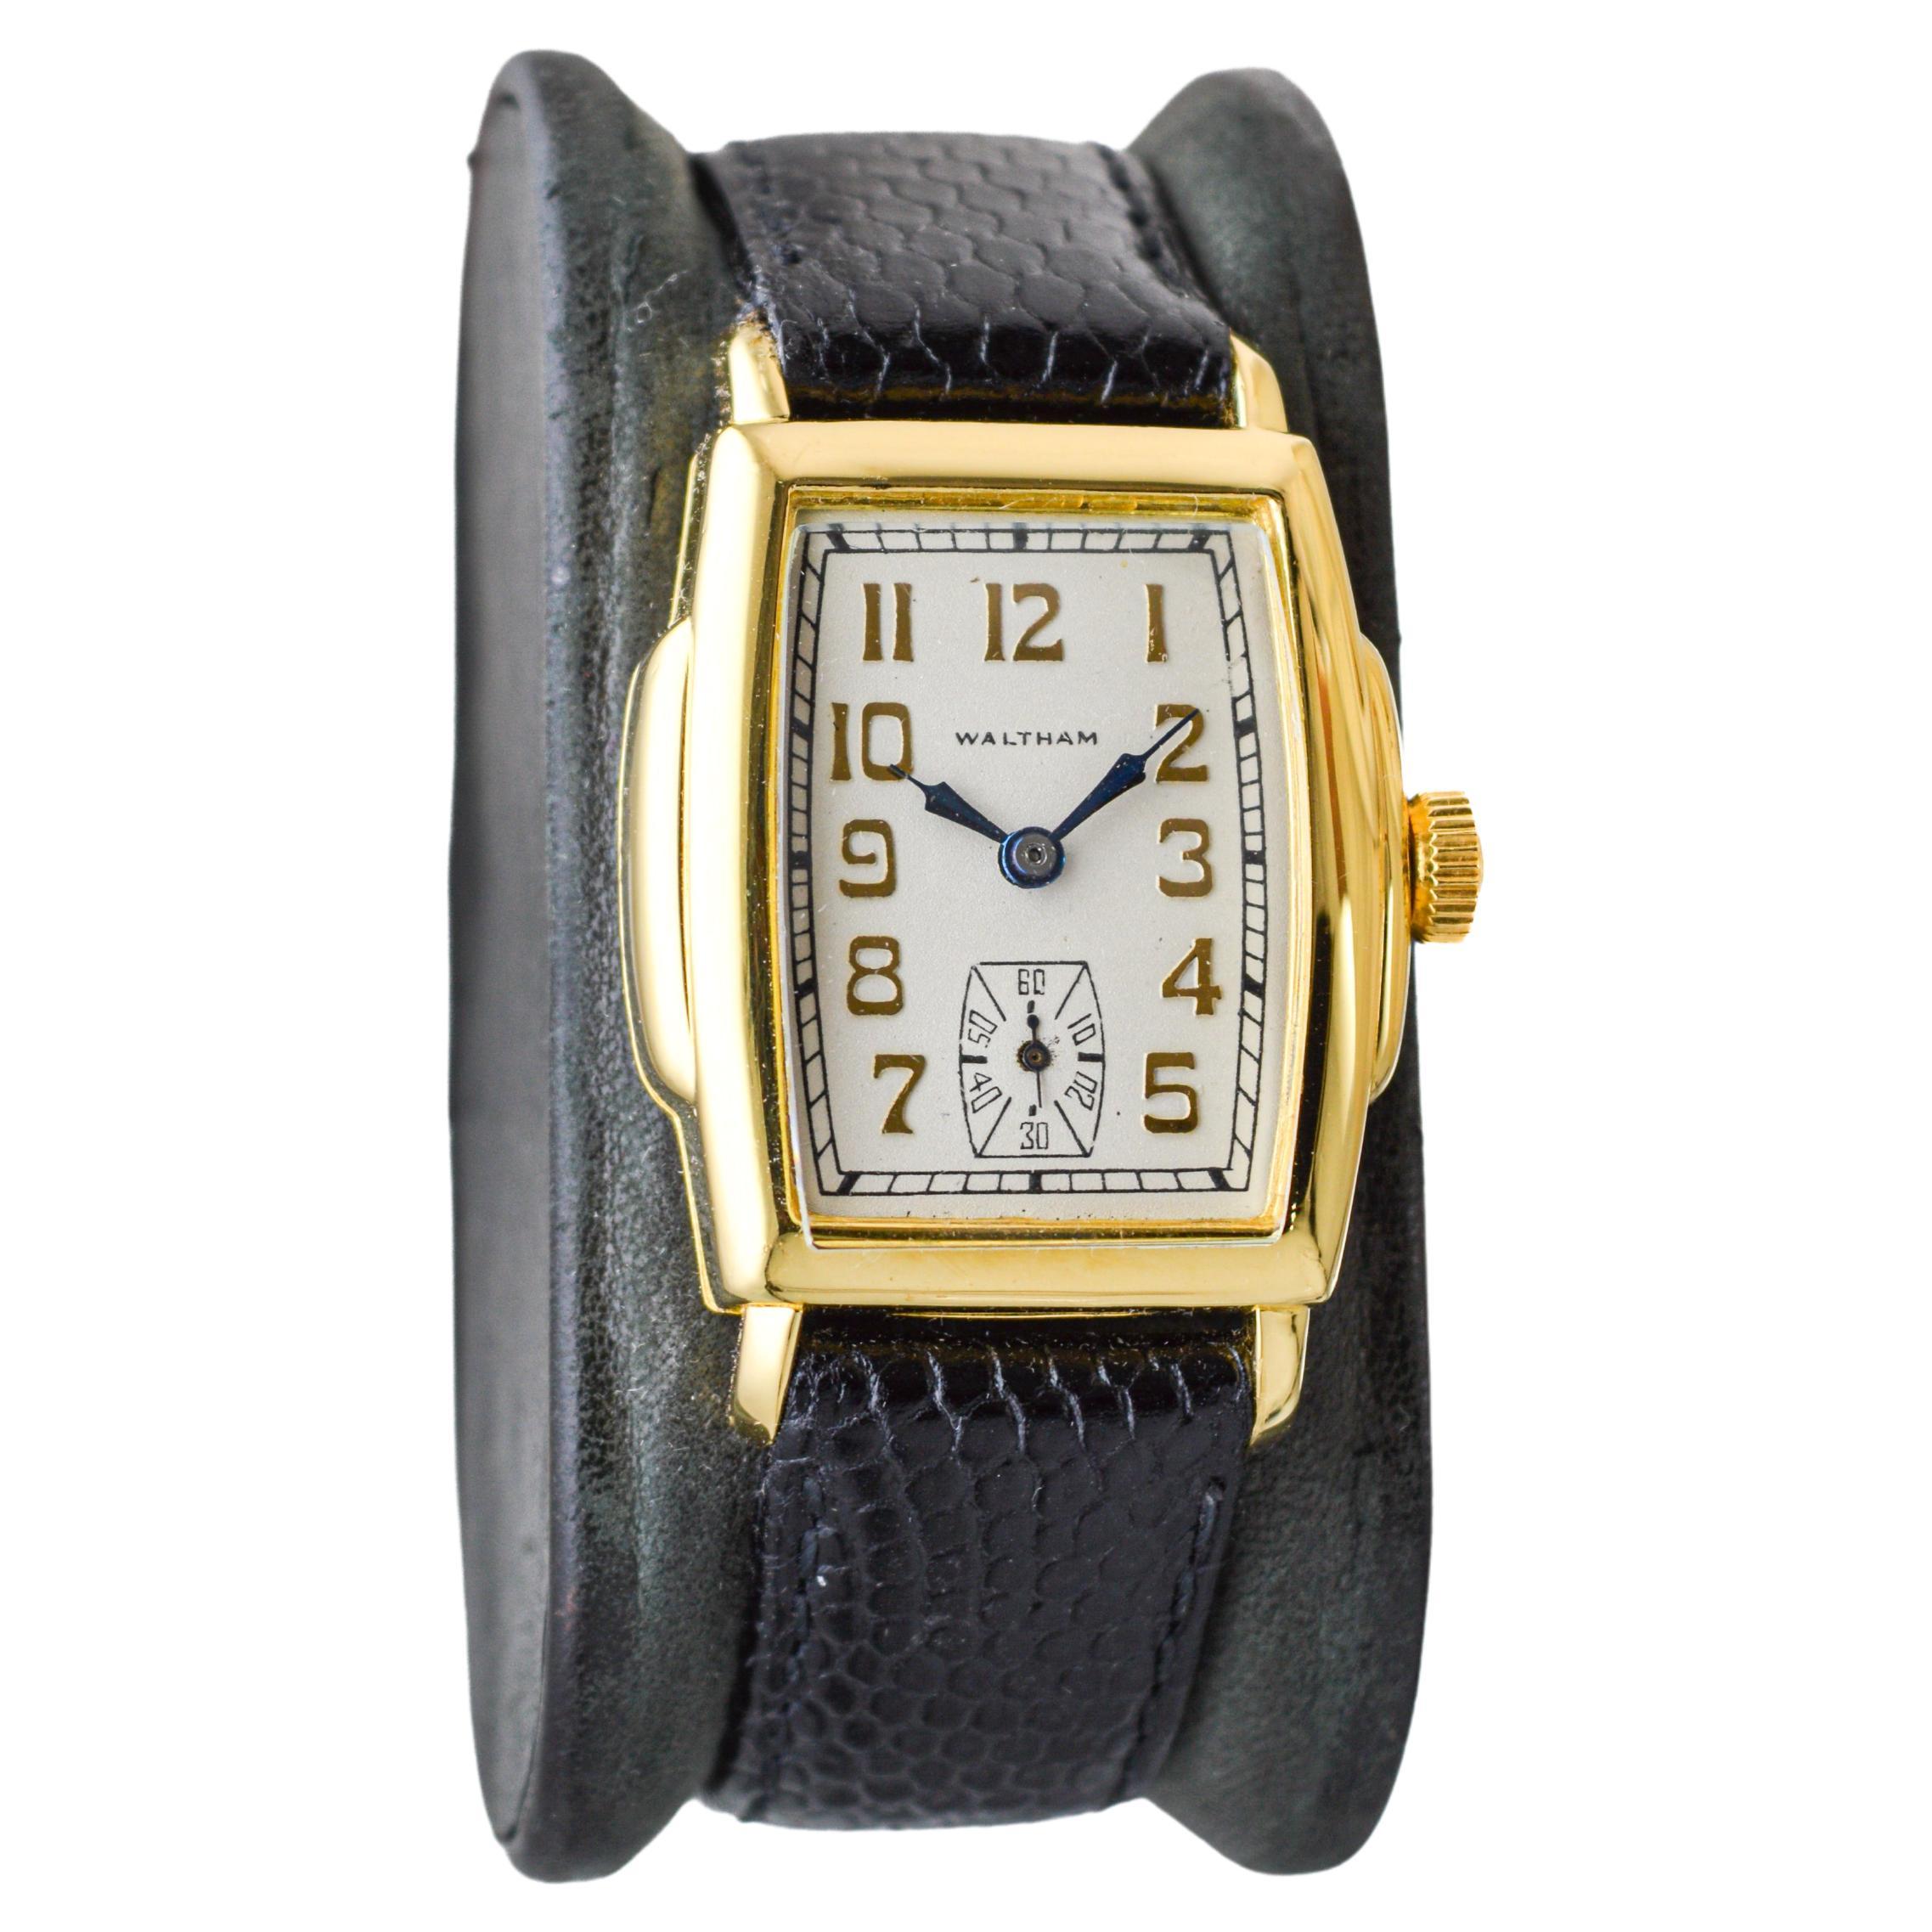 FACTORY / HOUSE: Waltham Watch Company
STYLE / REFERENCE: Art Deco / Tortue Shape
METAL / MATERIAL: Yellow Gold Filled
CIRCA / YEAR: 1920's
DIMENSIONS / SIZE: Length 41mm X Width 28mm
MOVEMENT / CALIBER: Manual Winding / 21 Jewels / Caliber